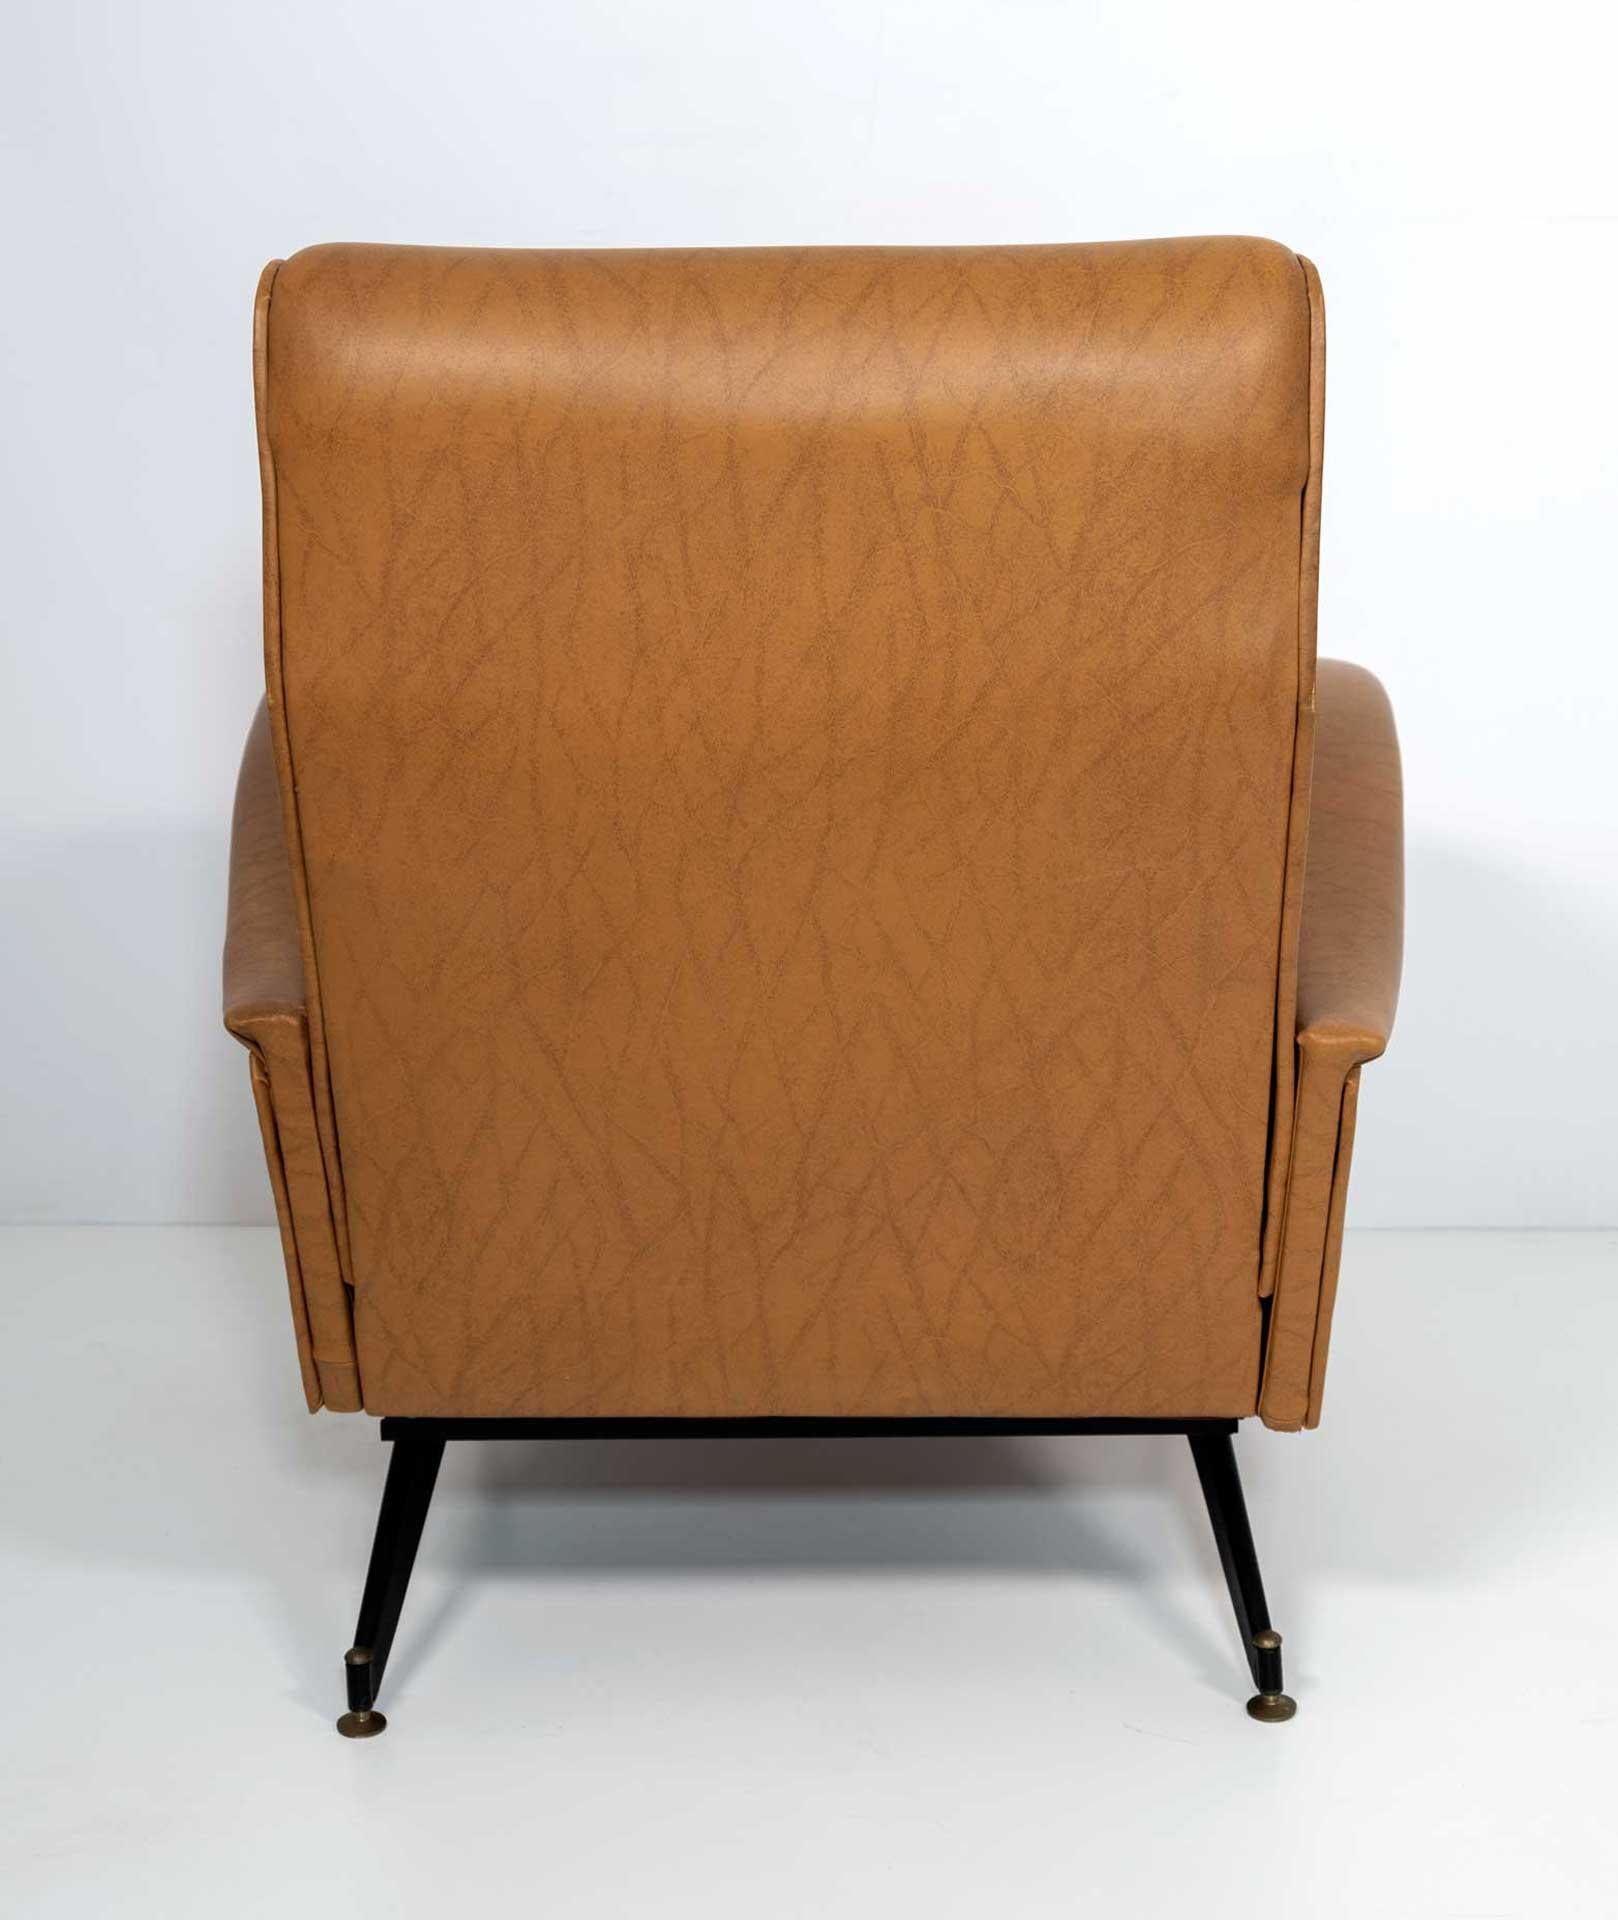 Marco Zanuso Style Mid-Century Modern Italian Leather Lounge Chair, 1970s For Sale 4